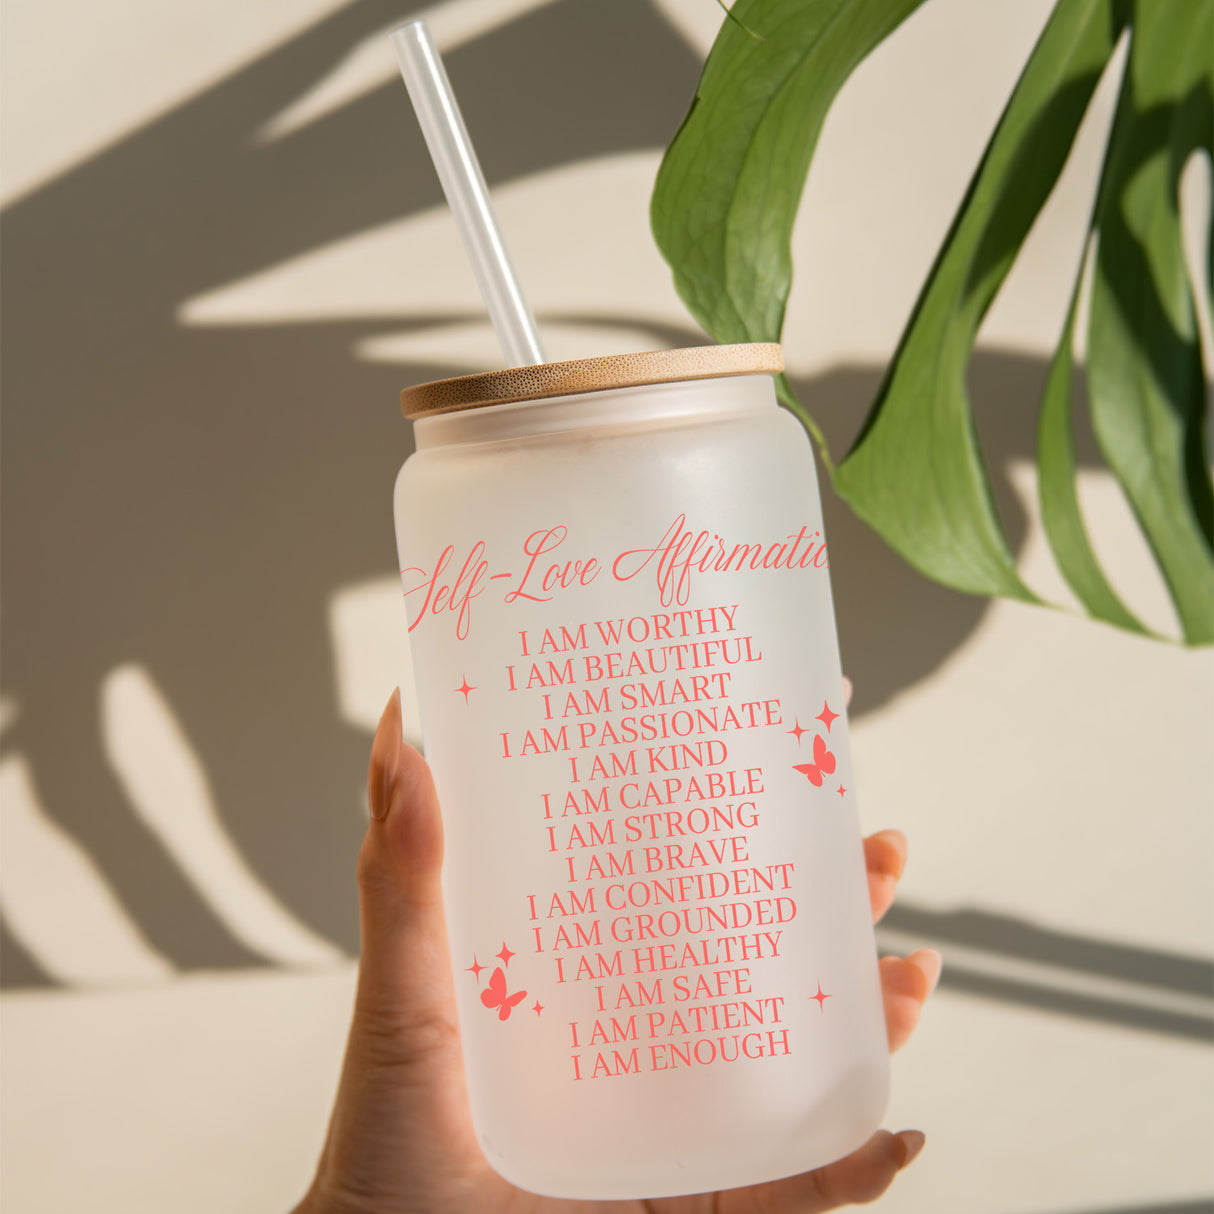 Beautiful phrases of self love affirmations adorn this Frosted Iced Coffee Glass Can.